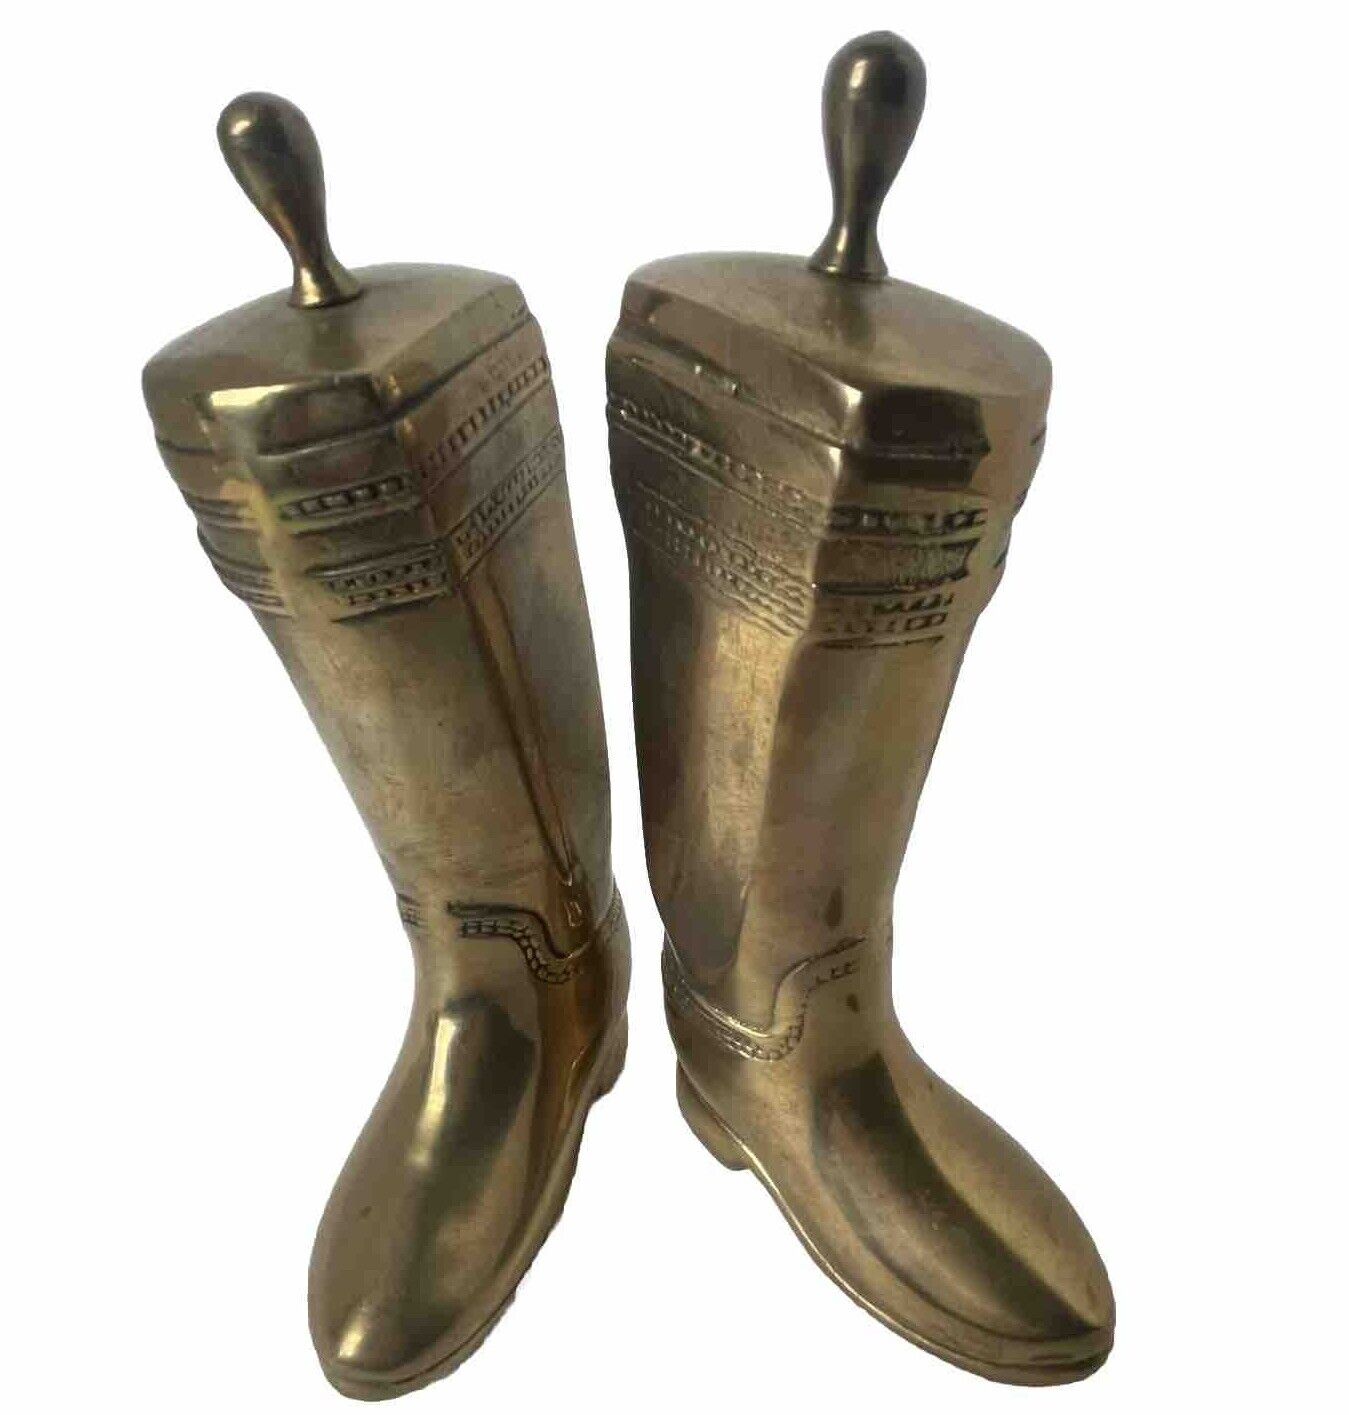 VTG BRASS BOOKENDS English RIDING BOOTS  EQUESTRIAN Horse KOREA Solid Library